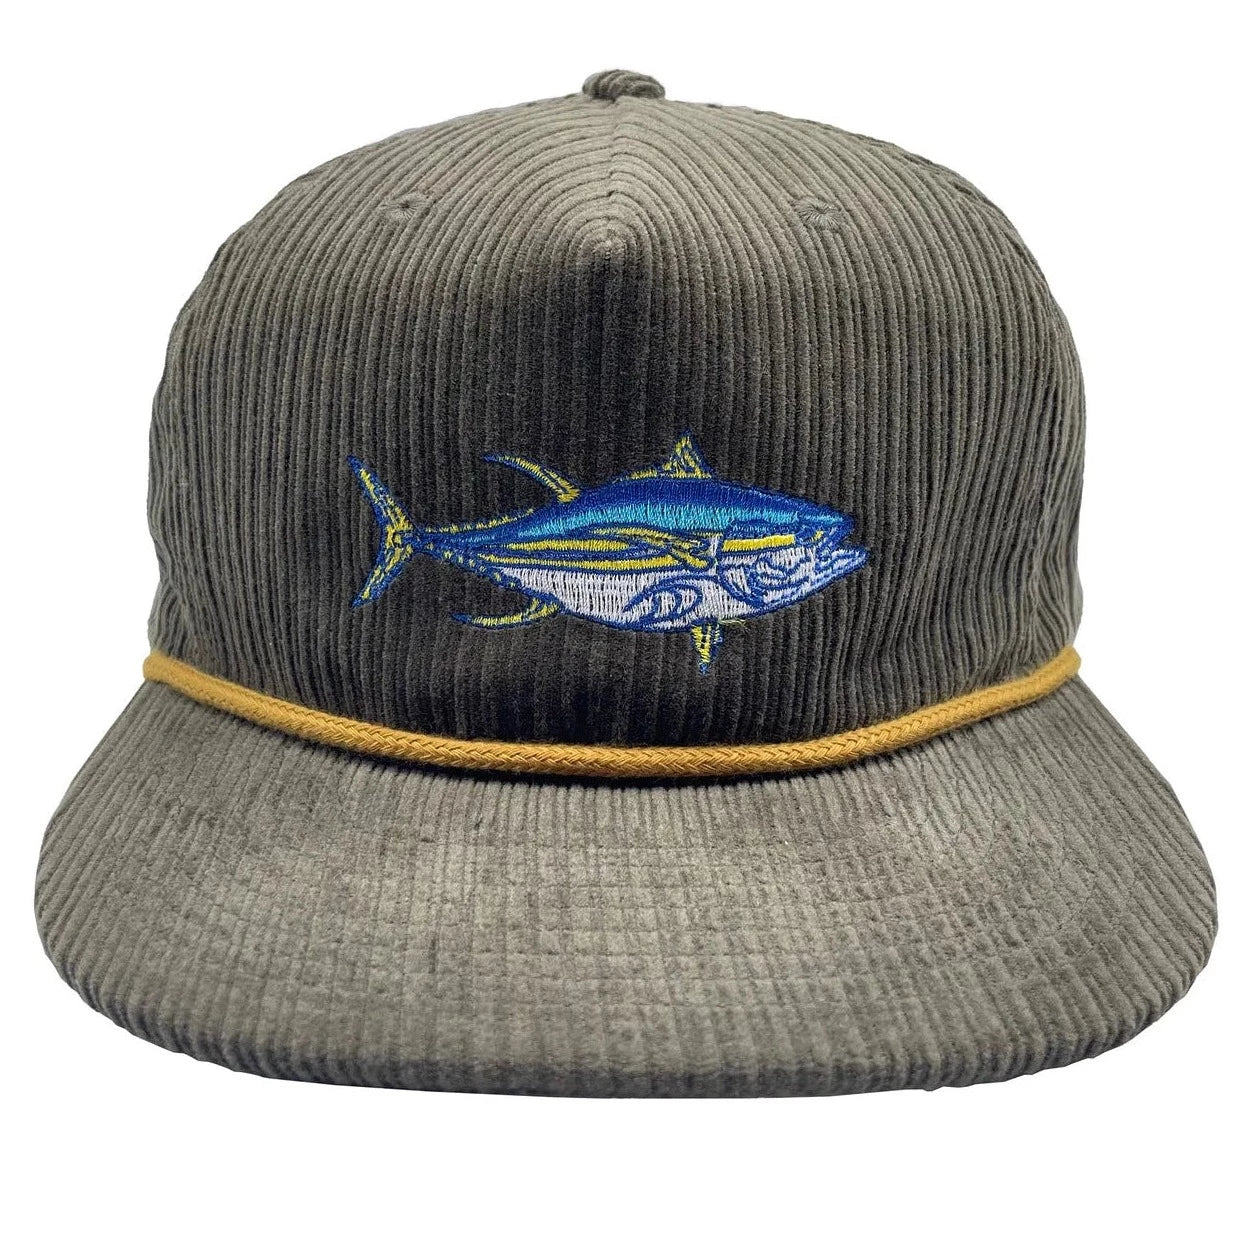 Yellowfin Unstructured Wale Cord 5 Panel Snapback